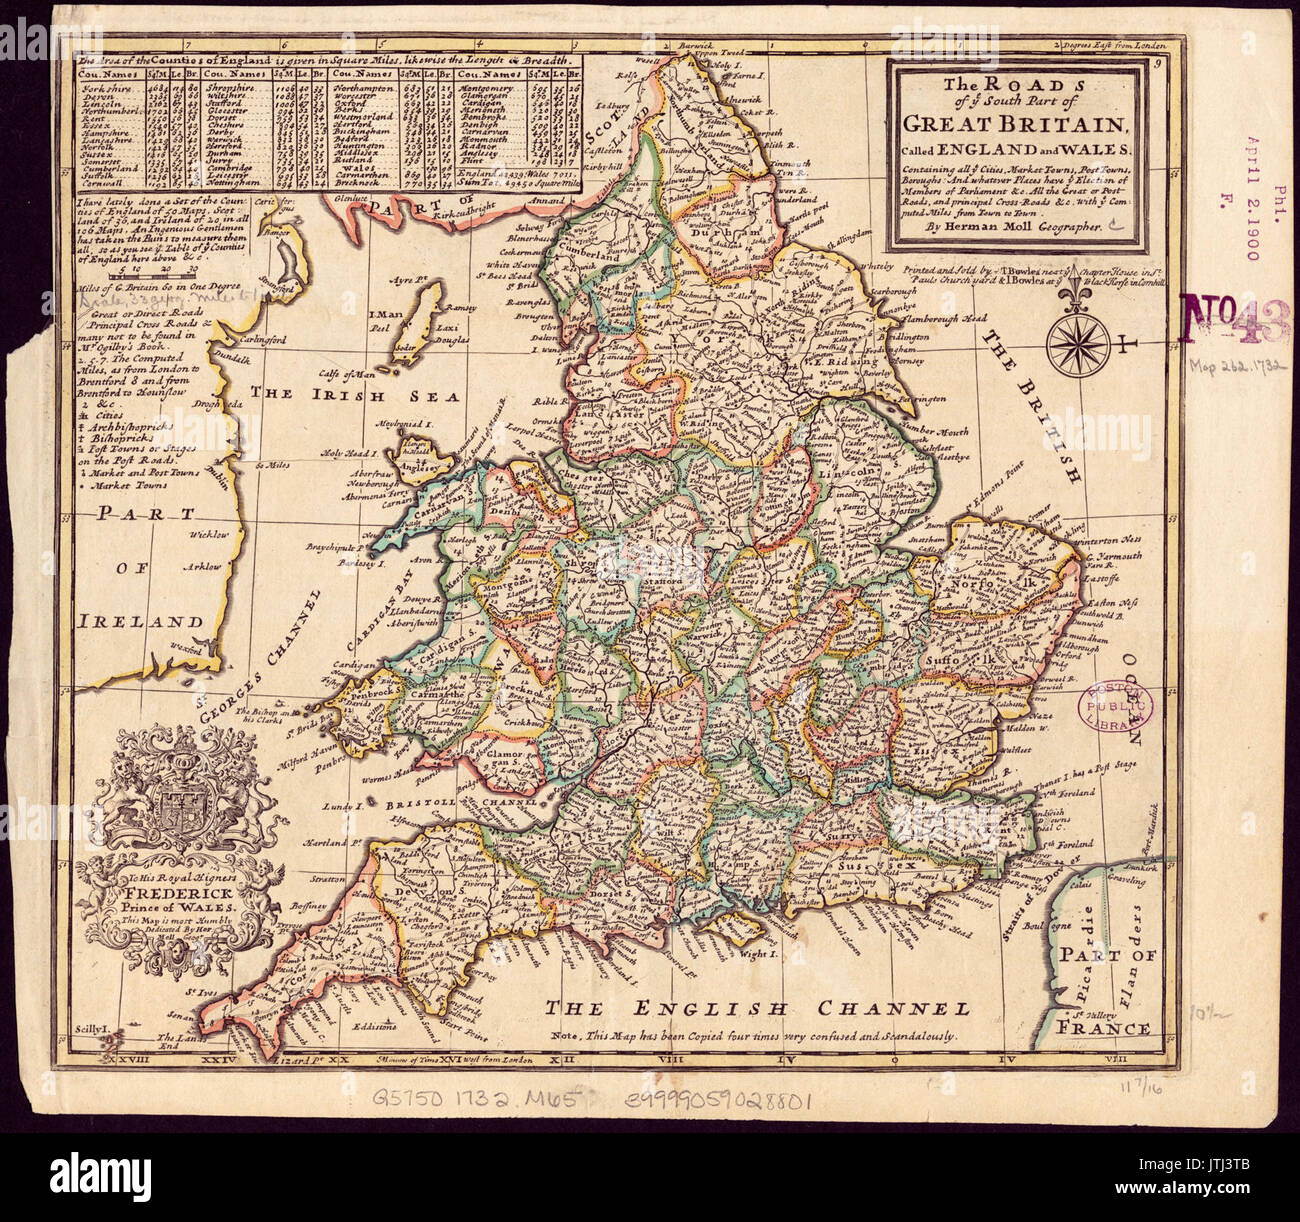 The roads of ye south part of Great Britain, called England and Wales, containing all ye cities, market towns, post towns, boroughs  and whatever places have ye election of members of parliament &c. (5385394216) Stock Photo